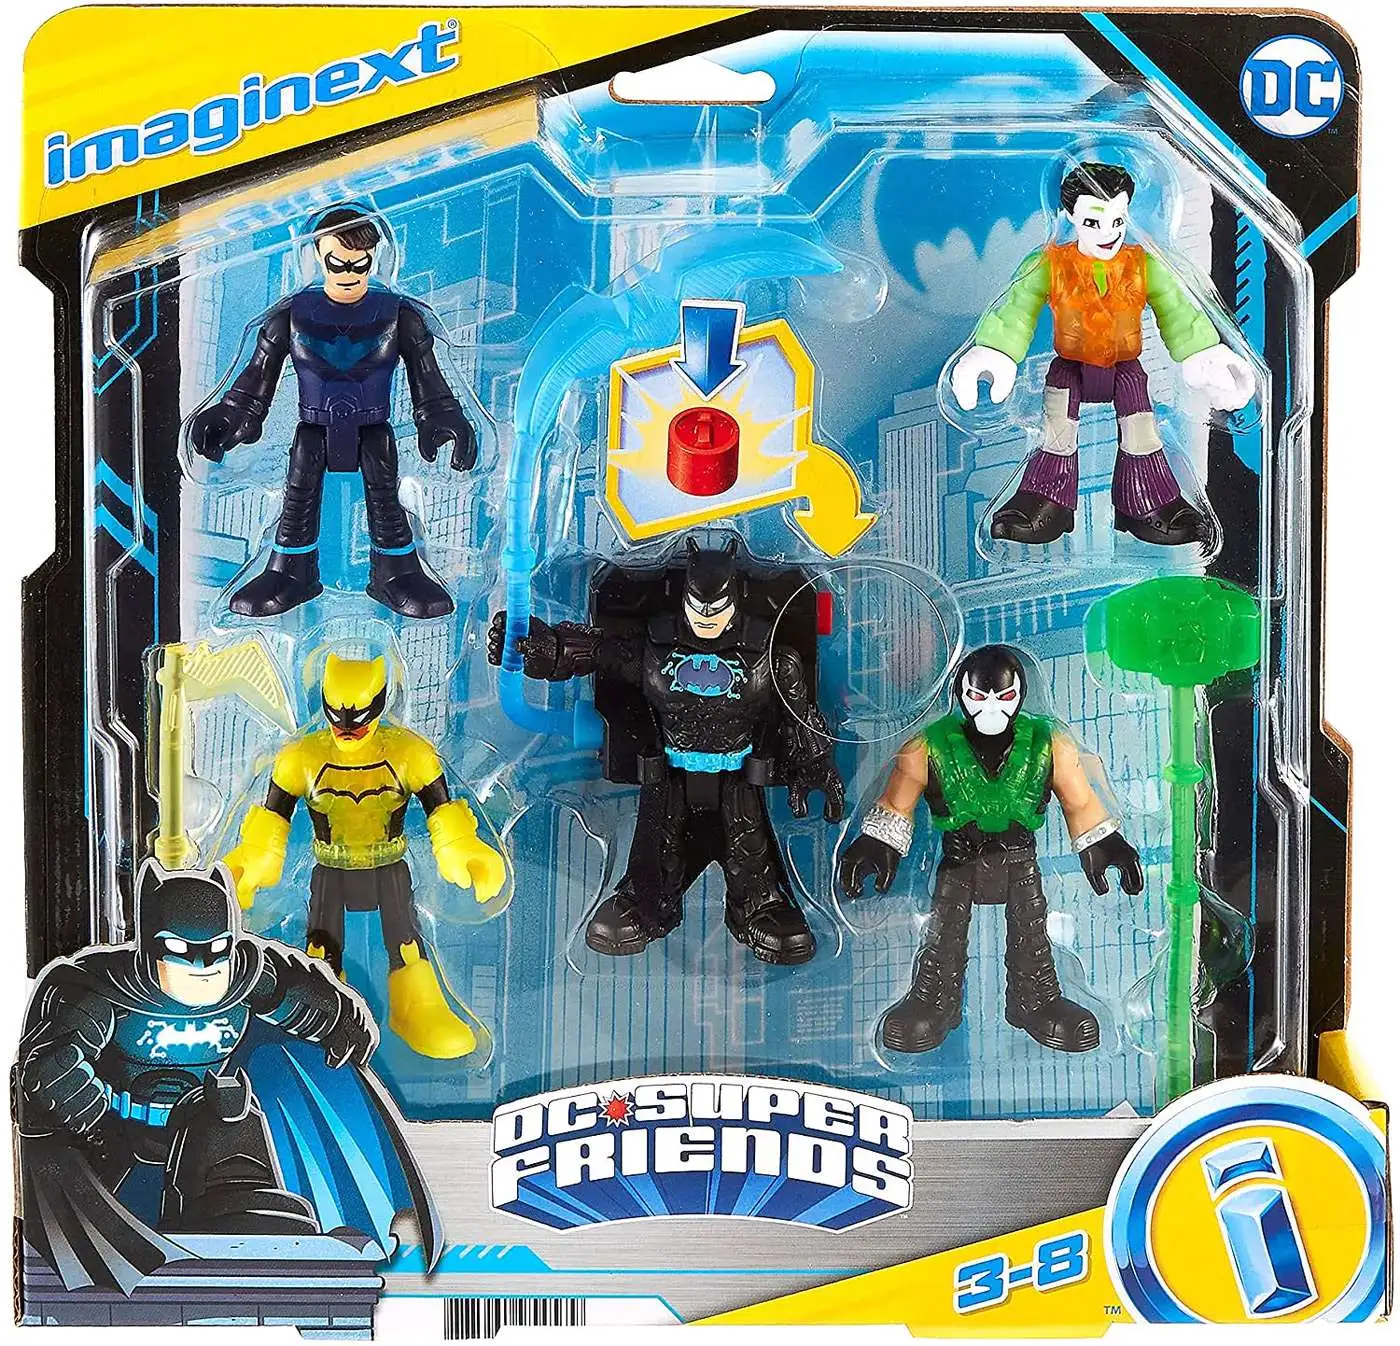 imaginext DC Super Friends Bane & Motorcycle New in Box 